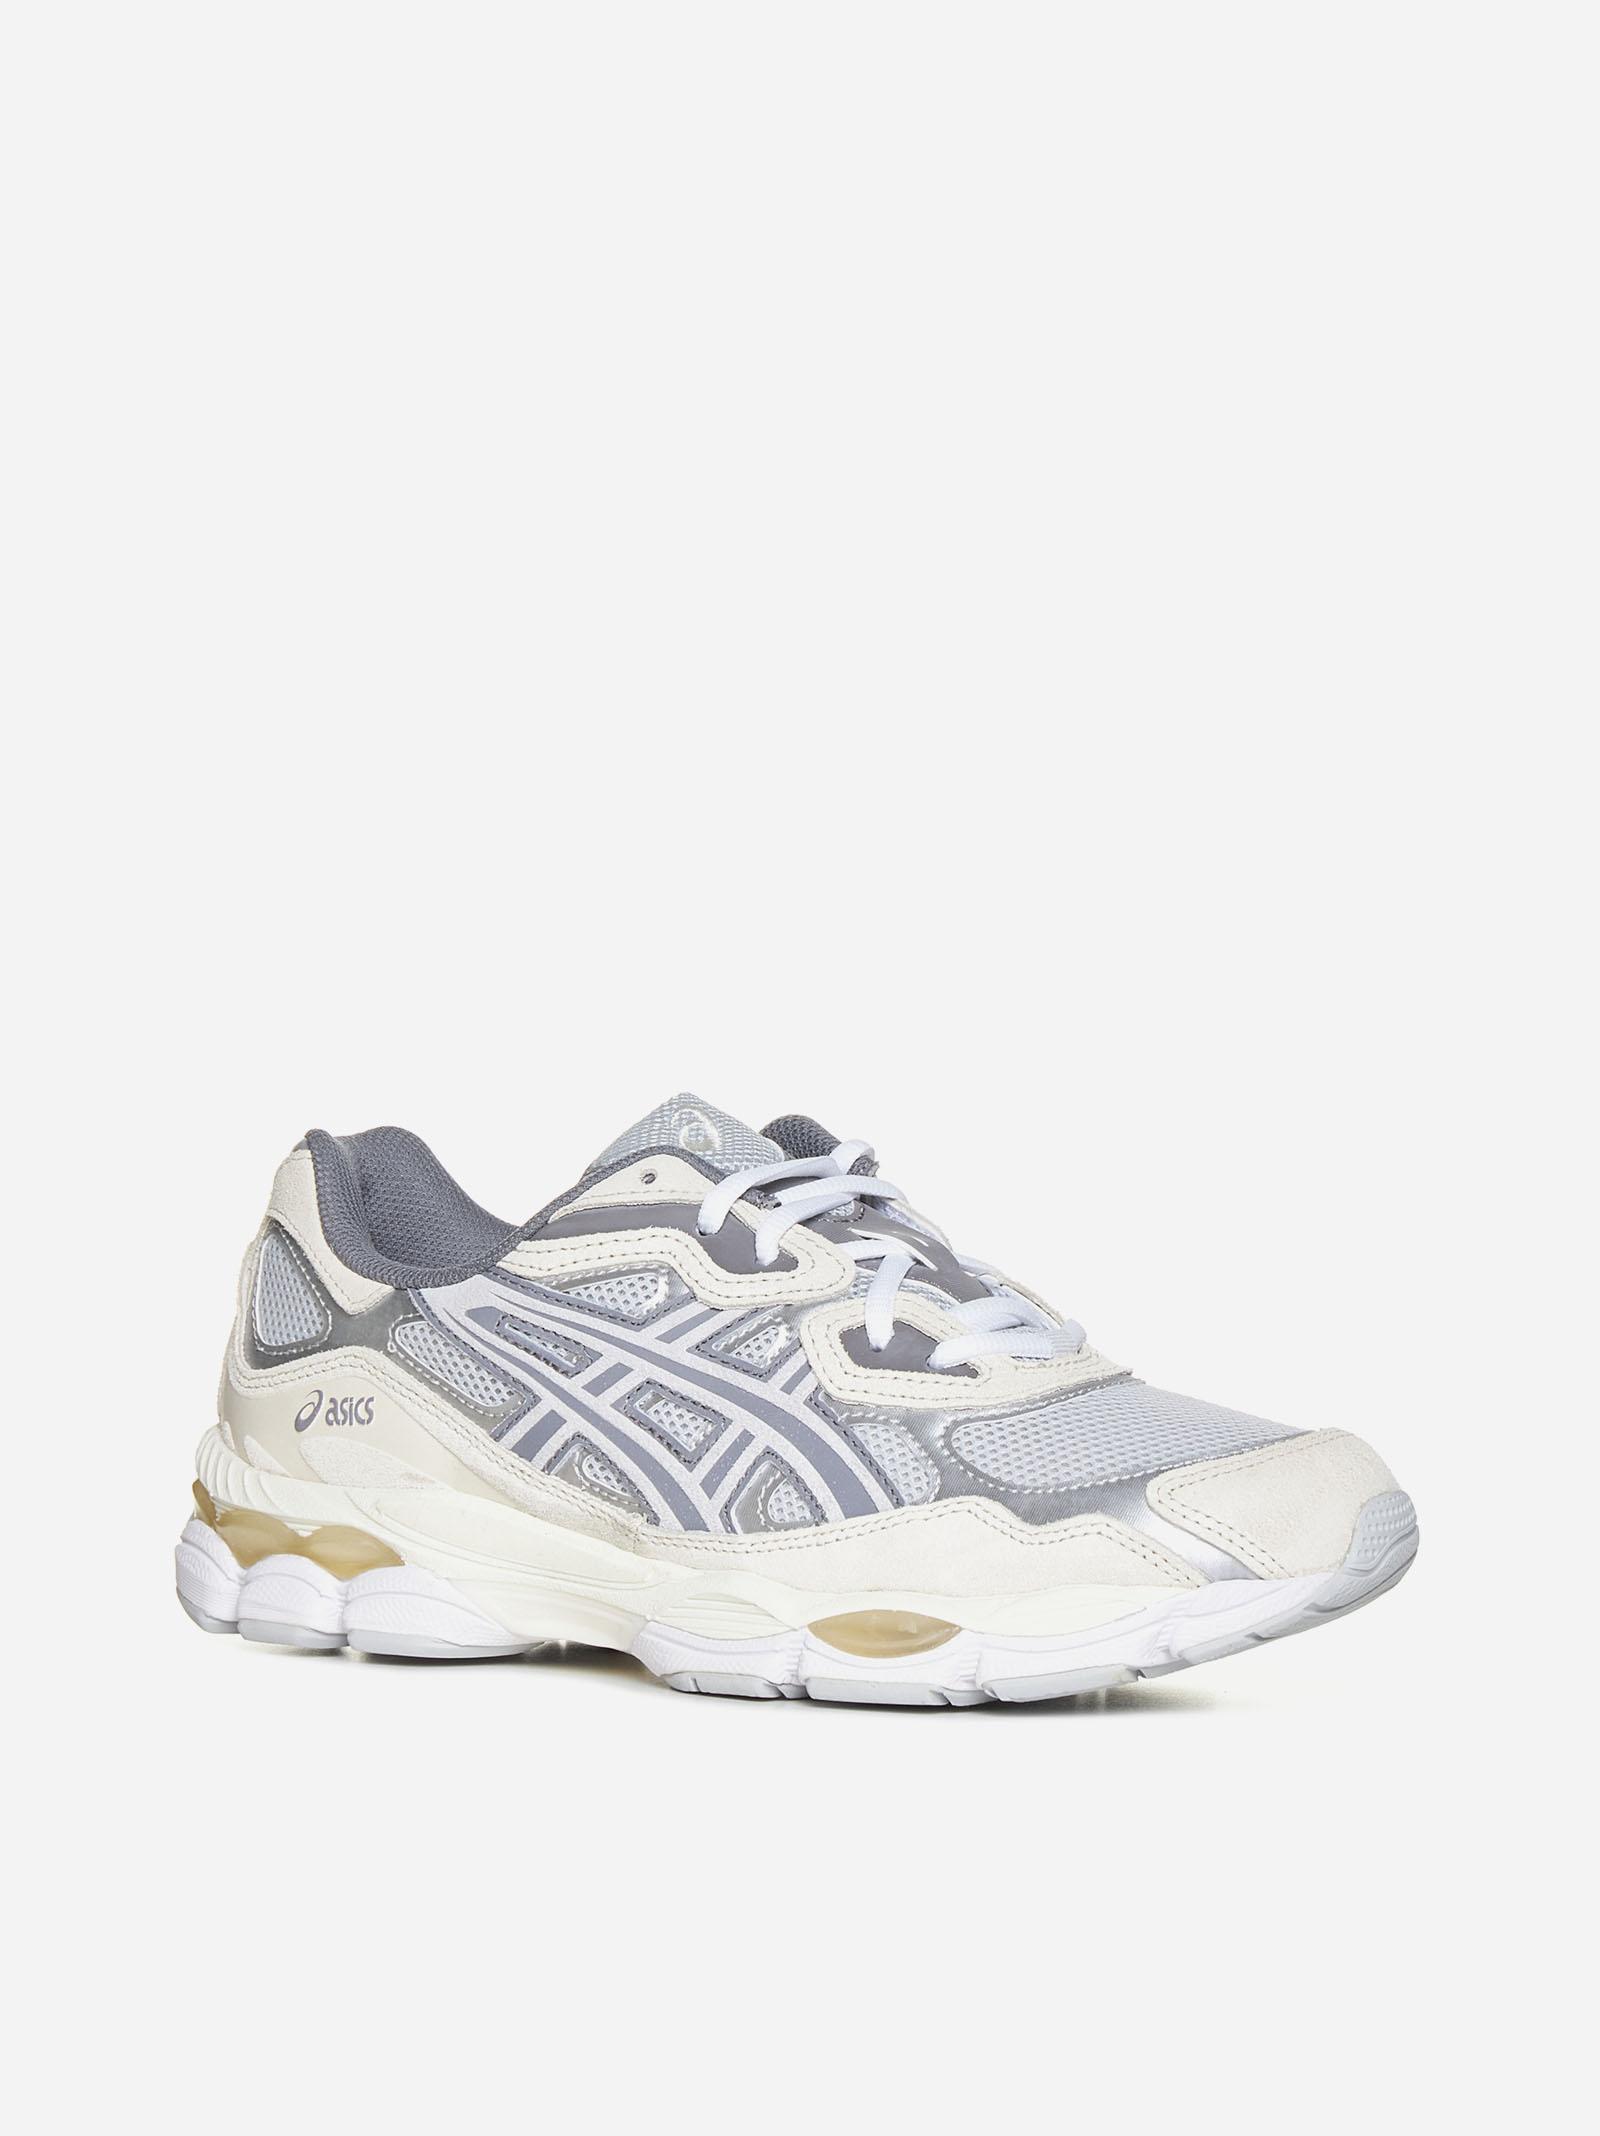 Asics Gel-nyc Sneakers Concrete / Oatmeal in White for Men | Lyst